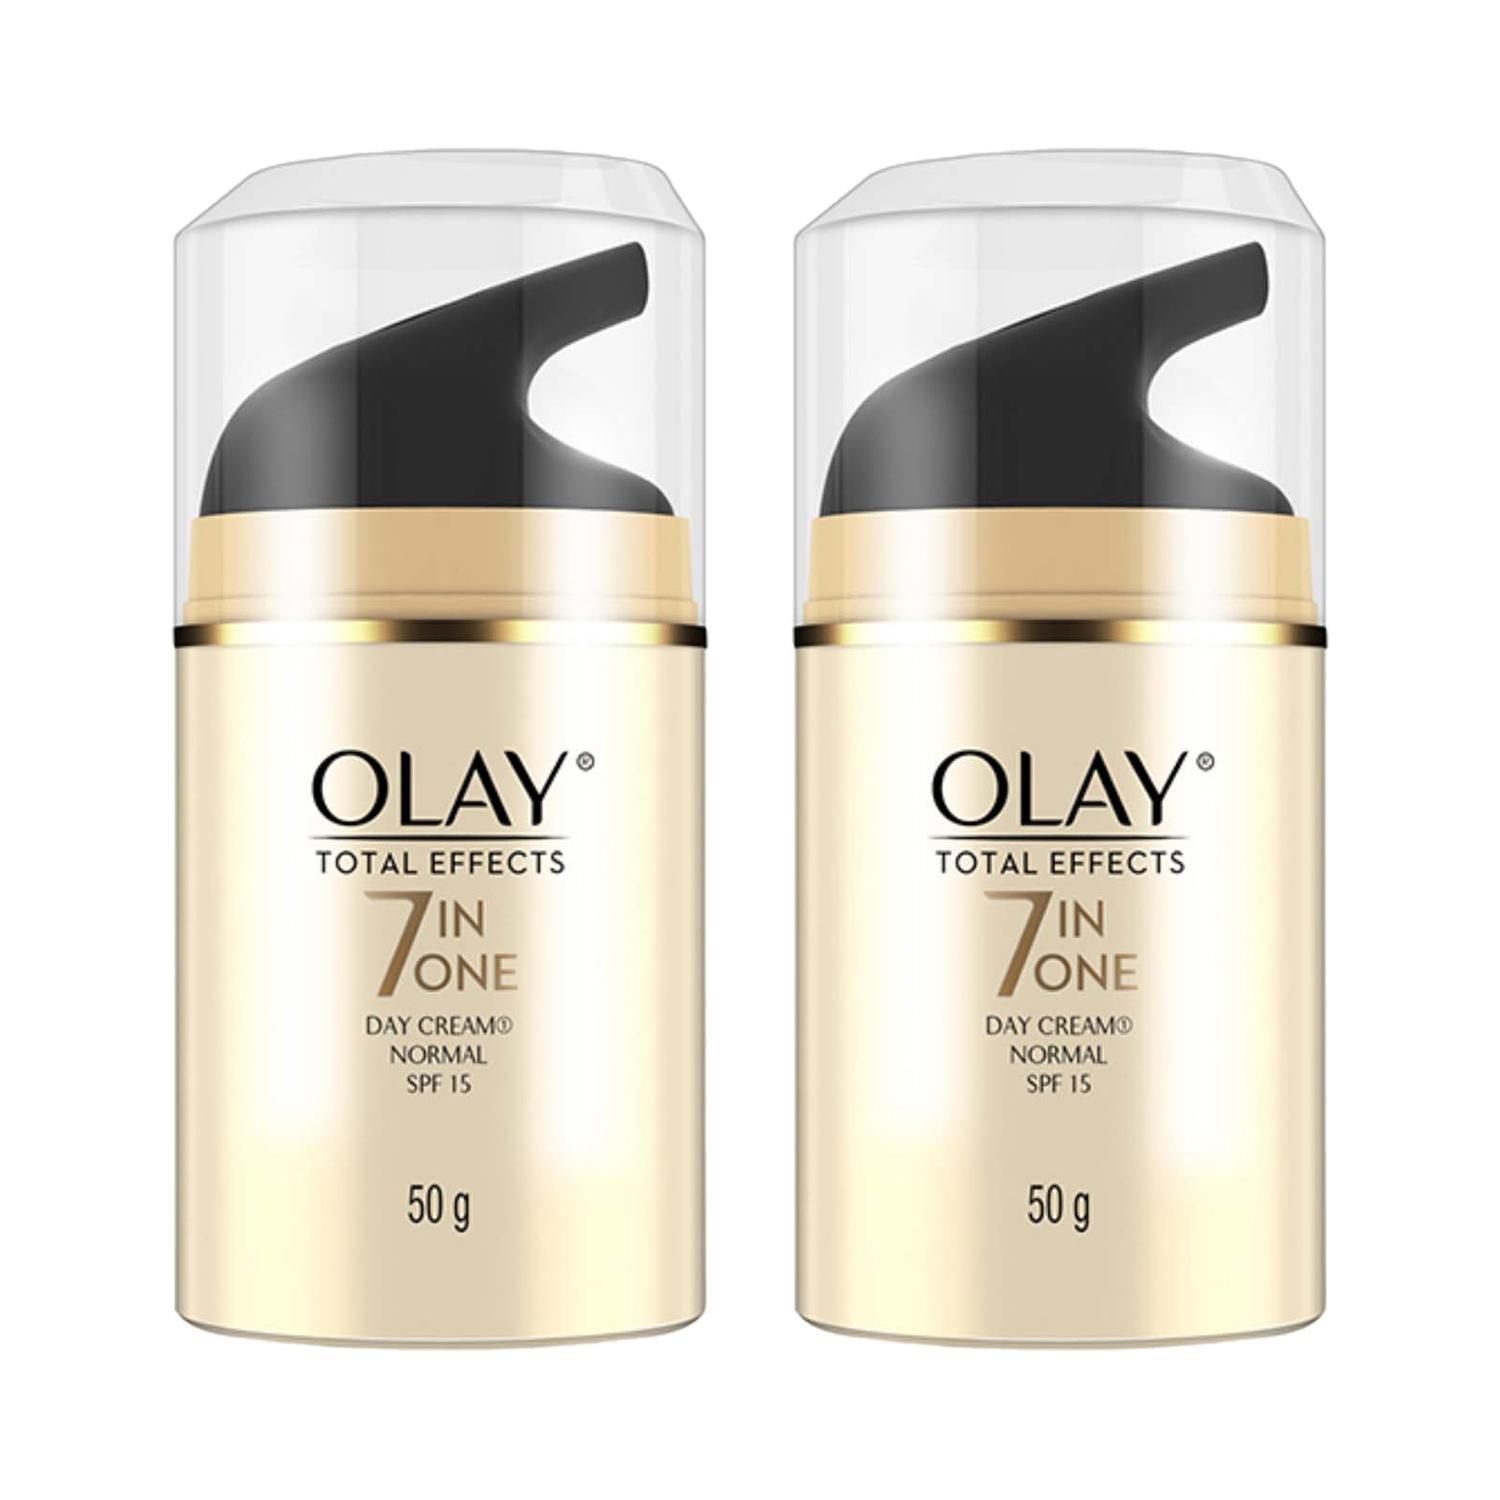 olay-7-in-1-total-effects-anti-ageing-day-cream-spf-15-(50g)-(pack-of-2)-combo